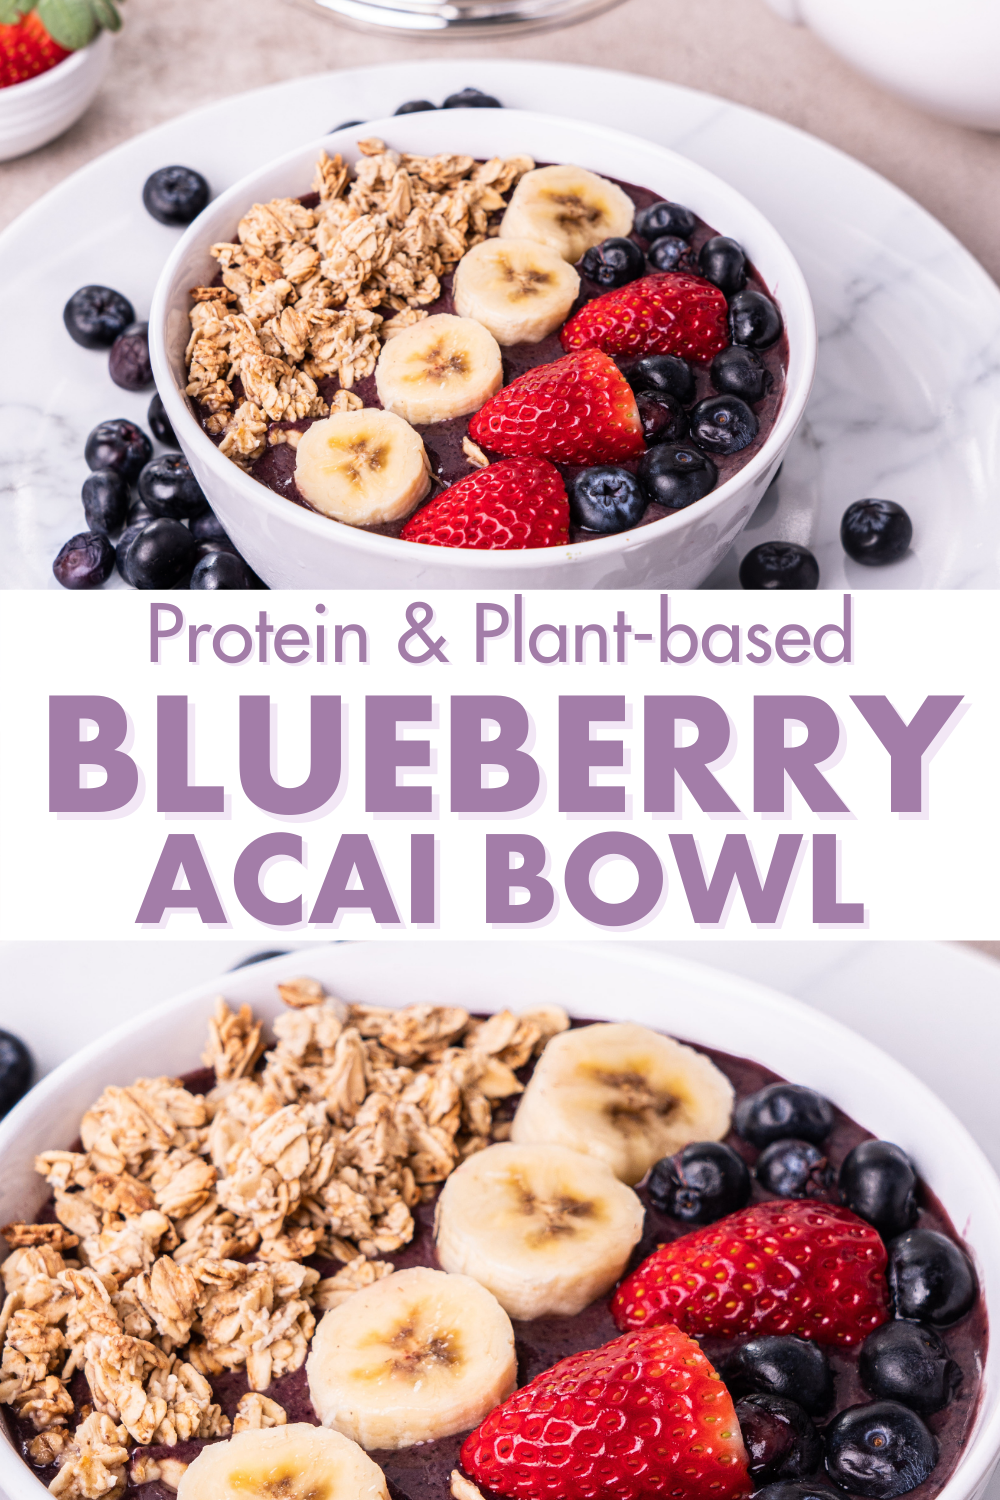 Blessed Blueberry Acai Bowl-EHPlabs